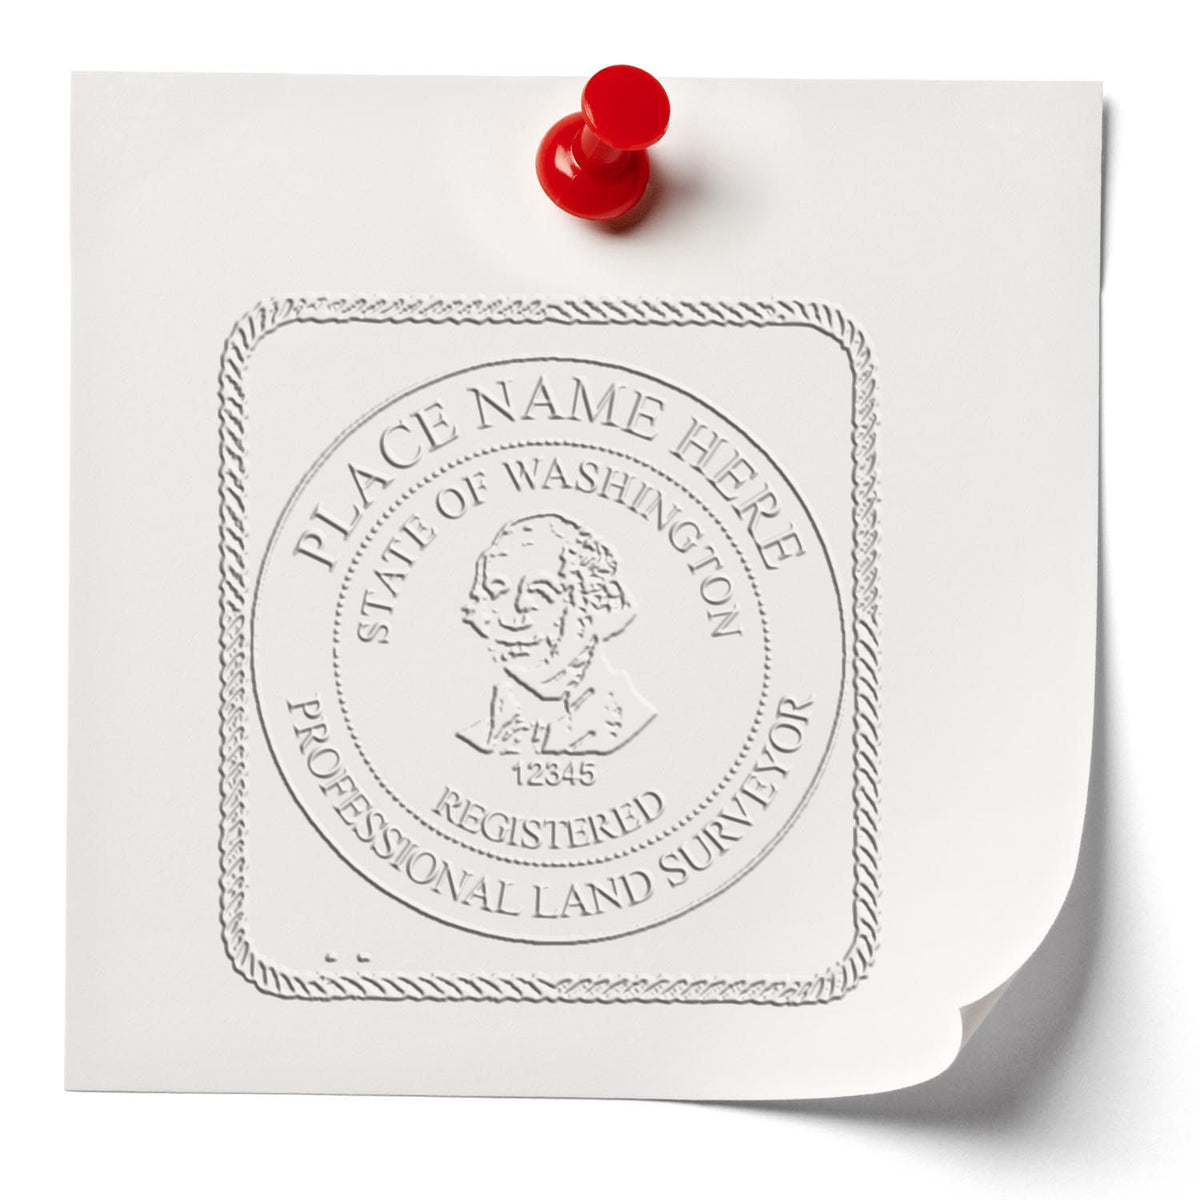 A lifestyle photo showing a stamped image of the State of Washington Soft Land Surveyor Embossing Seal on a piece of paper